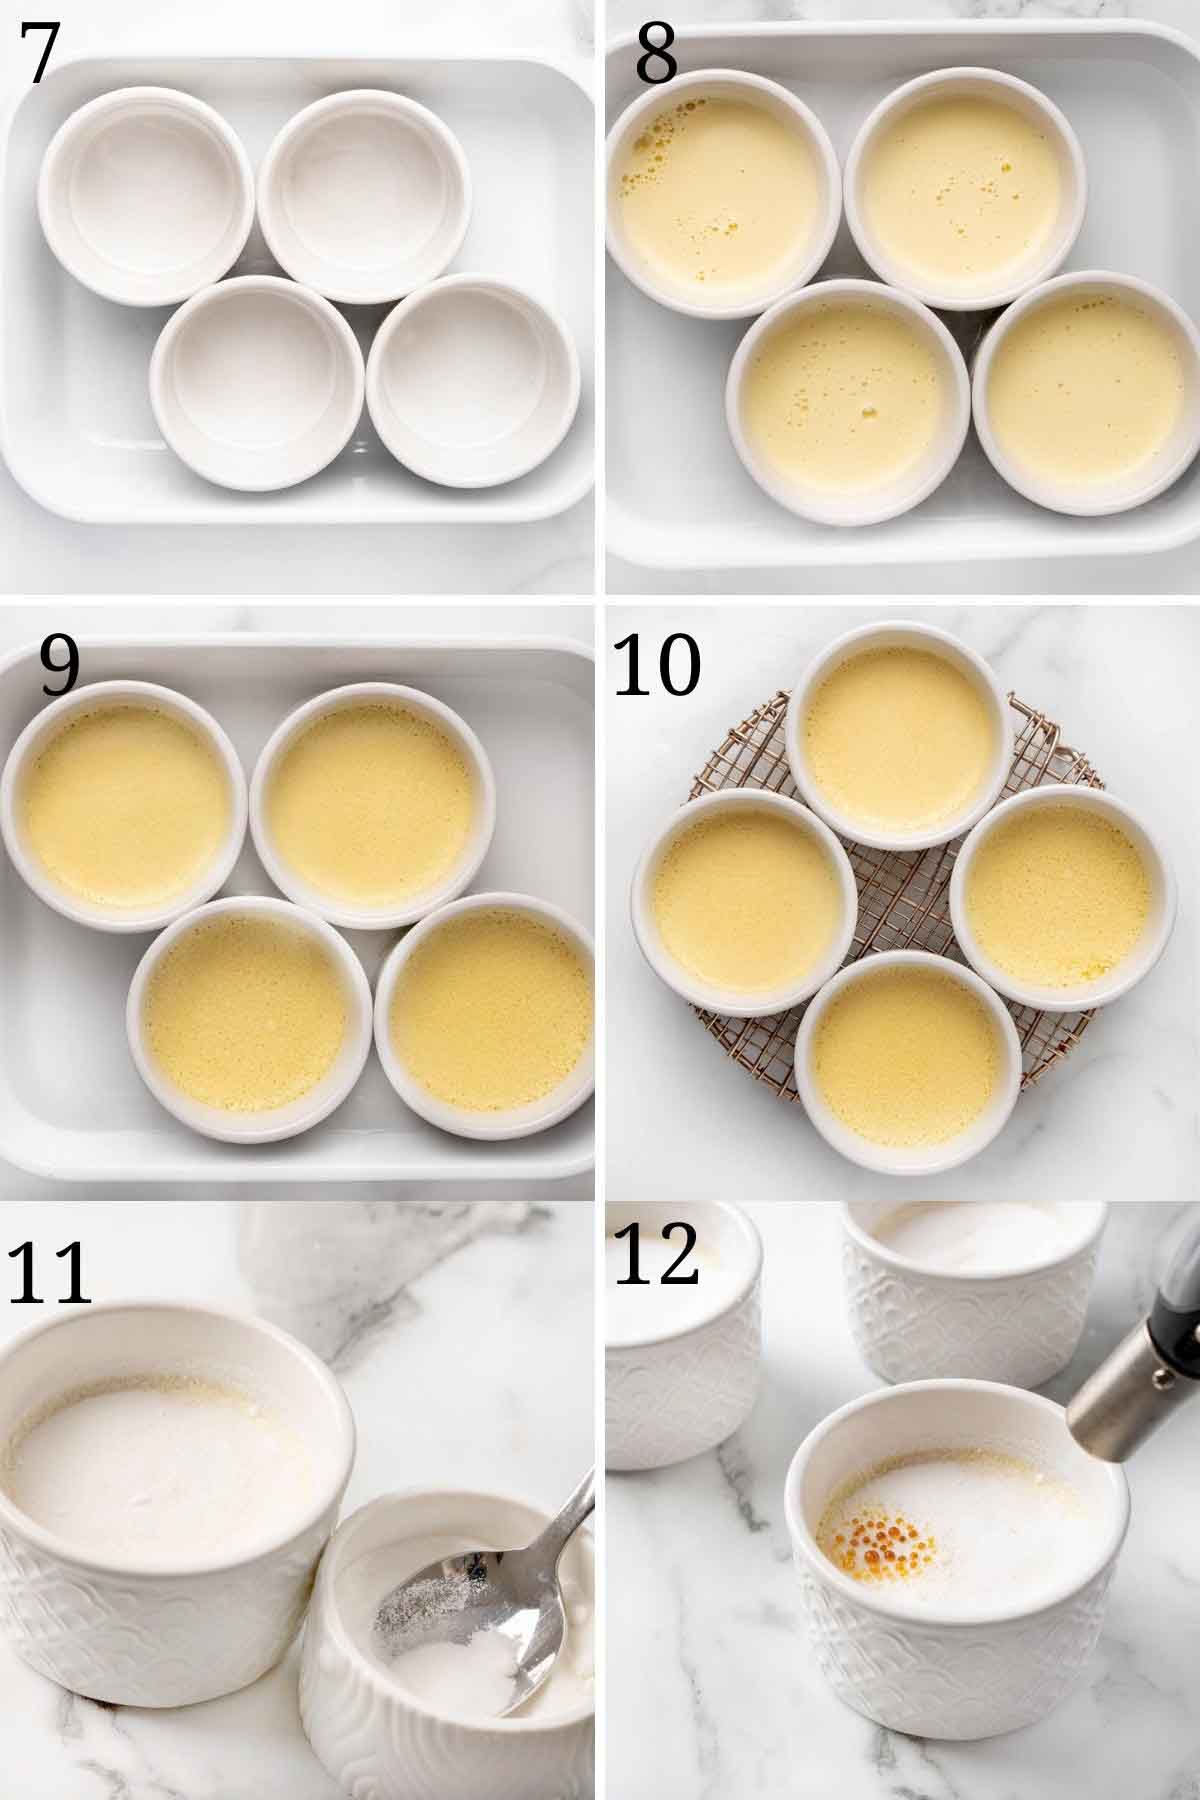 six images showing how to set up the cups and bake and finish the creme brulee